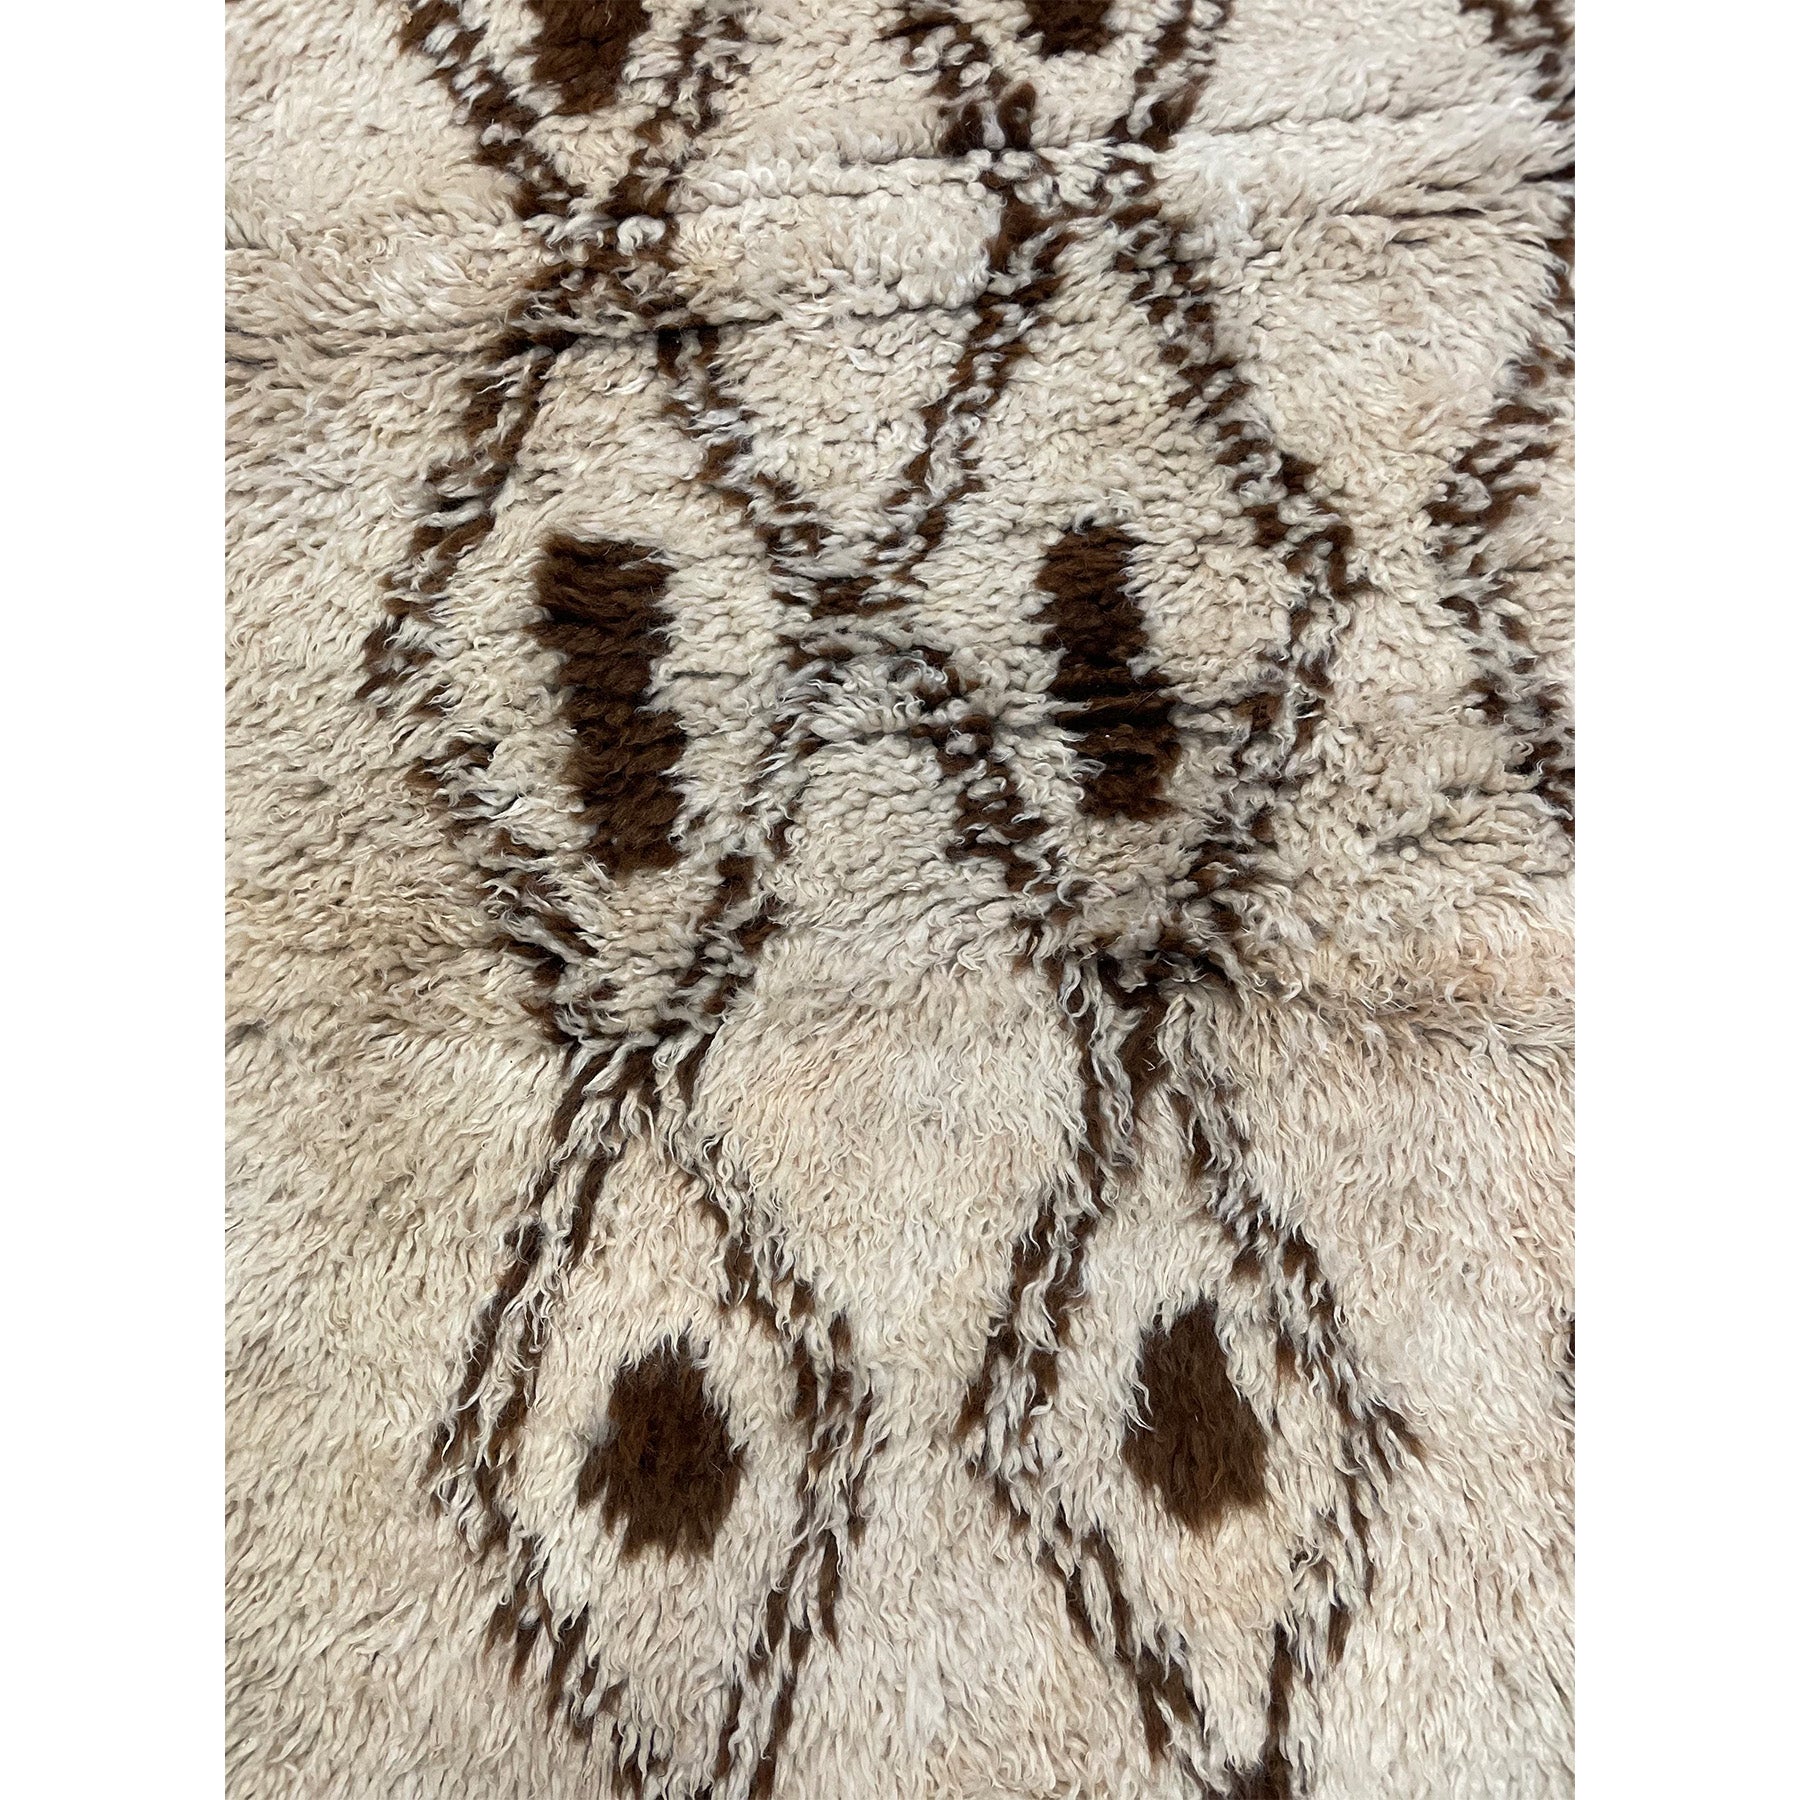 Classic mid century Azilal style Moroccan runner - Kantara | Moroccan Rugs